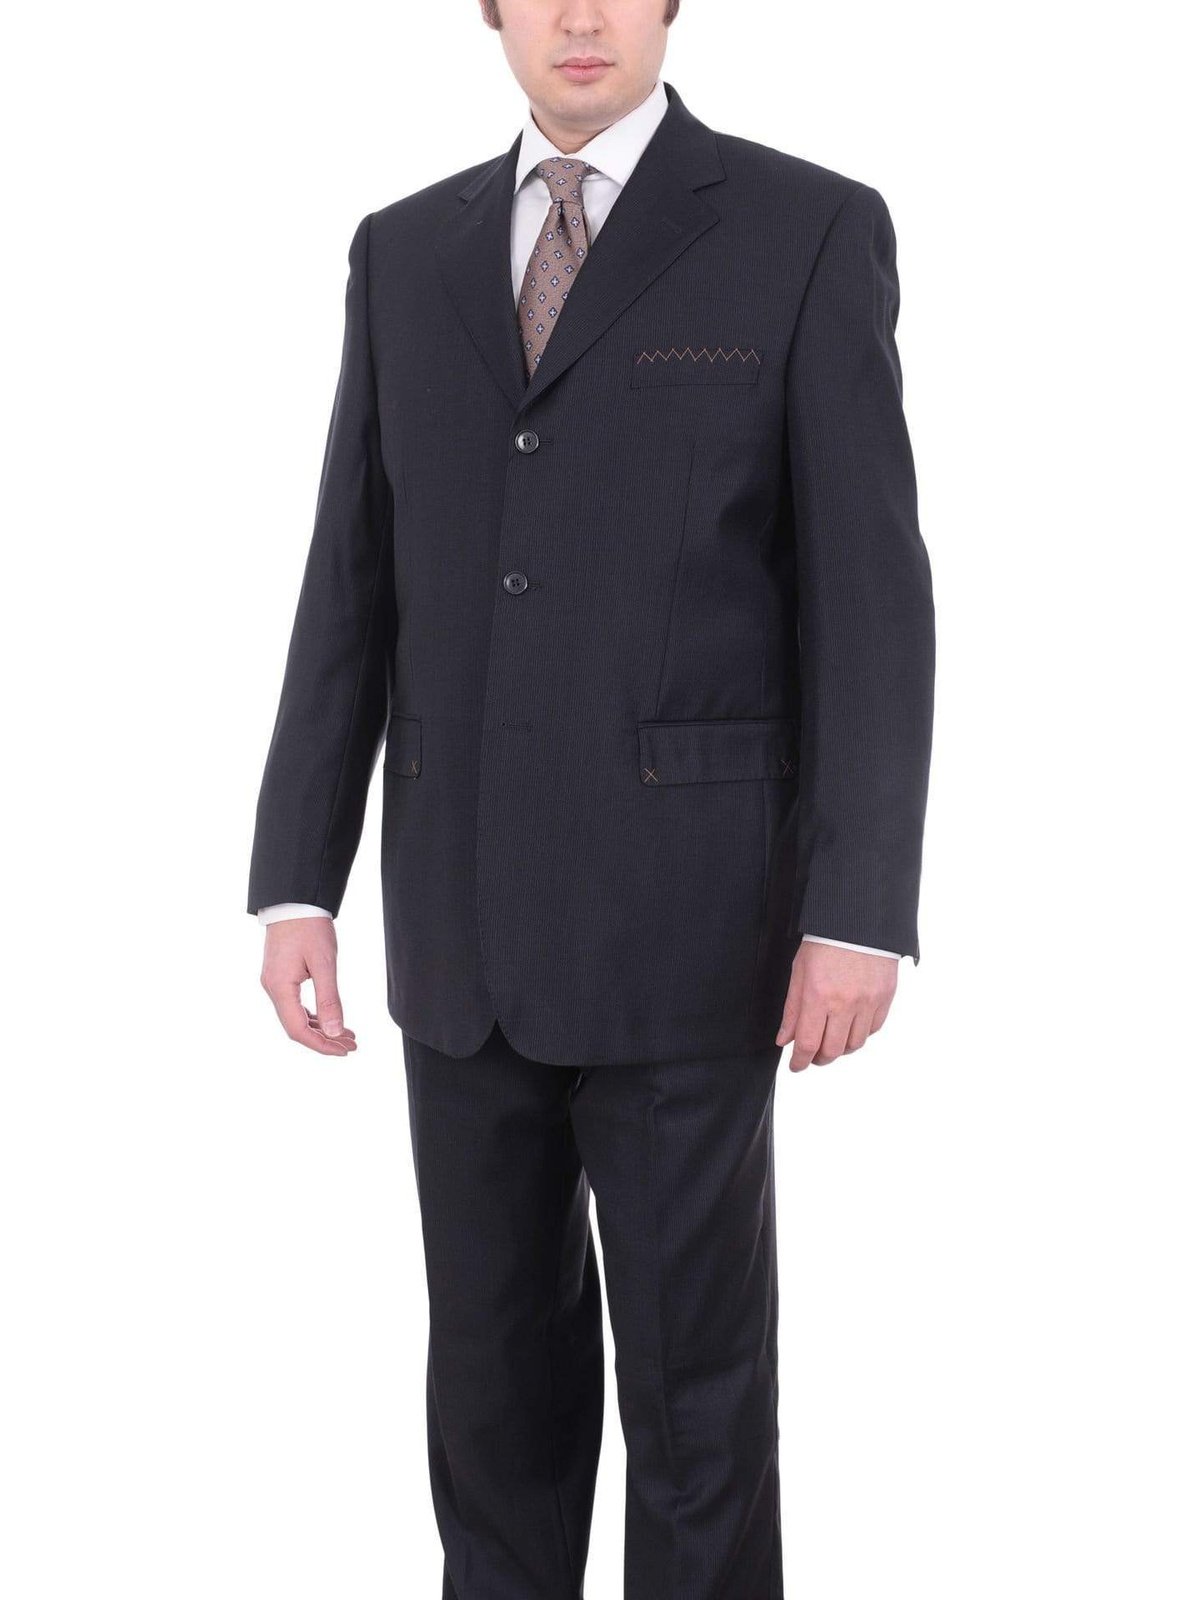 Carlo Palazzi Sale Suits 46R Mens Italy Classic Fit Navy Blue 3 Button Pleated 100% Wool Suit